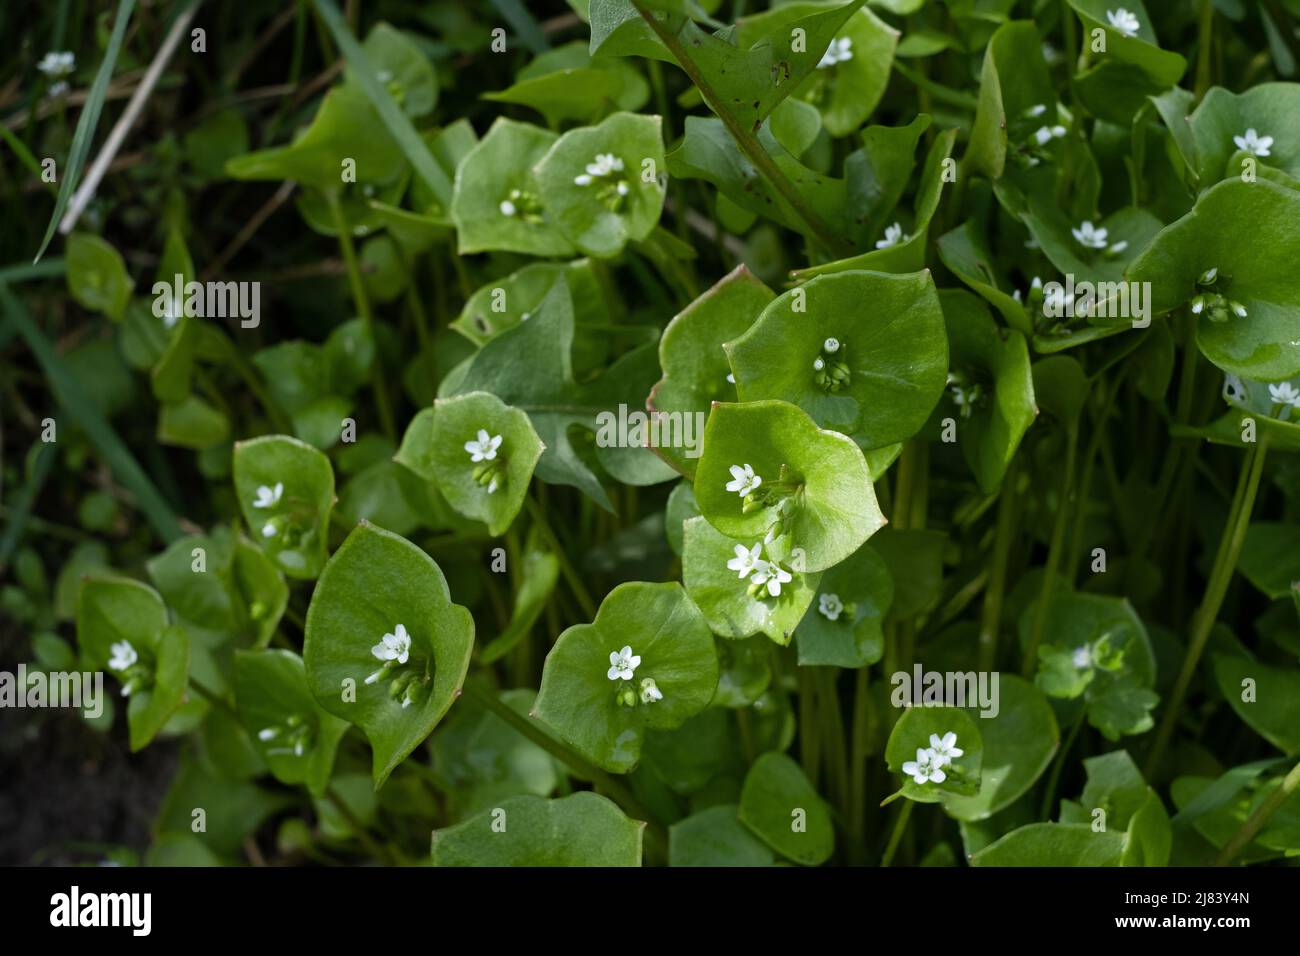 Claytonia perfoliata, Miner's Lettuce, an edible plant growing at the side of the road on the Essex/Suffolk border, UK. Stock Photo